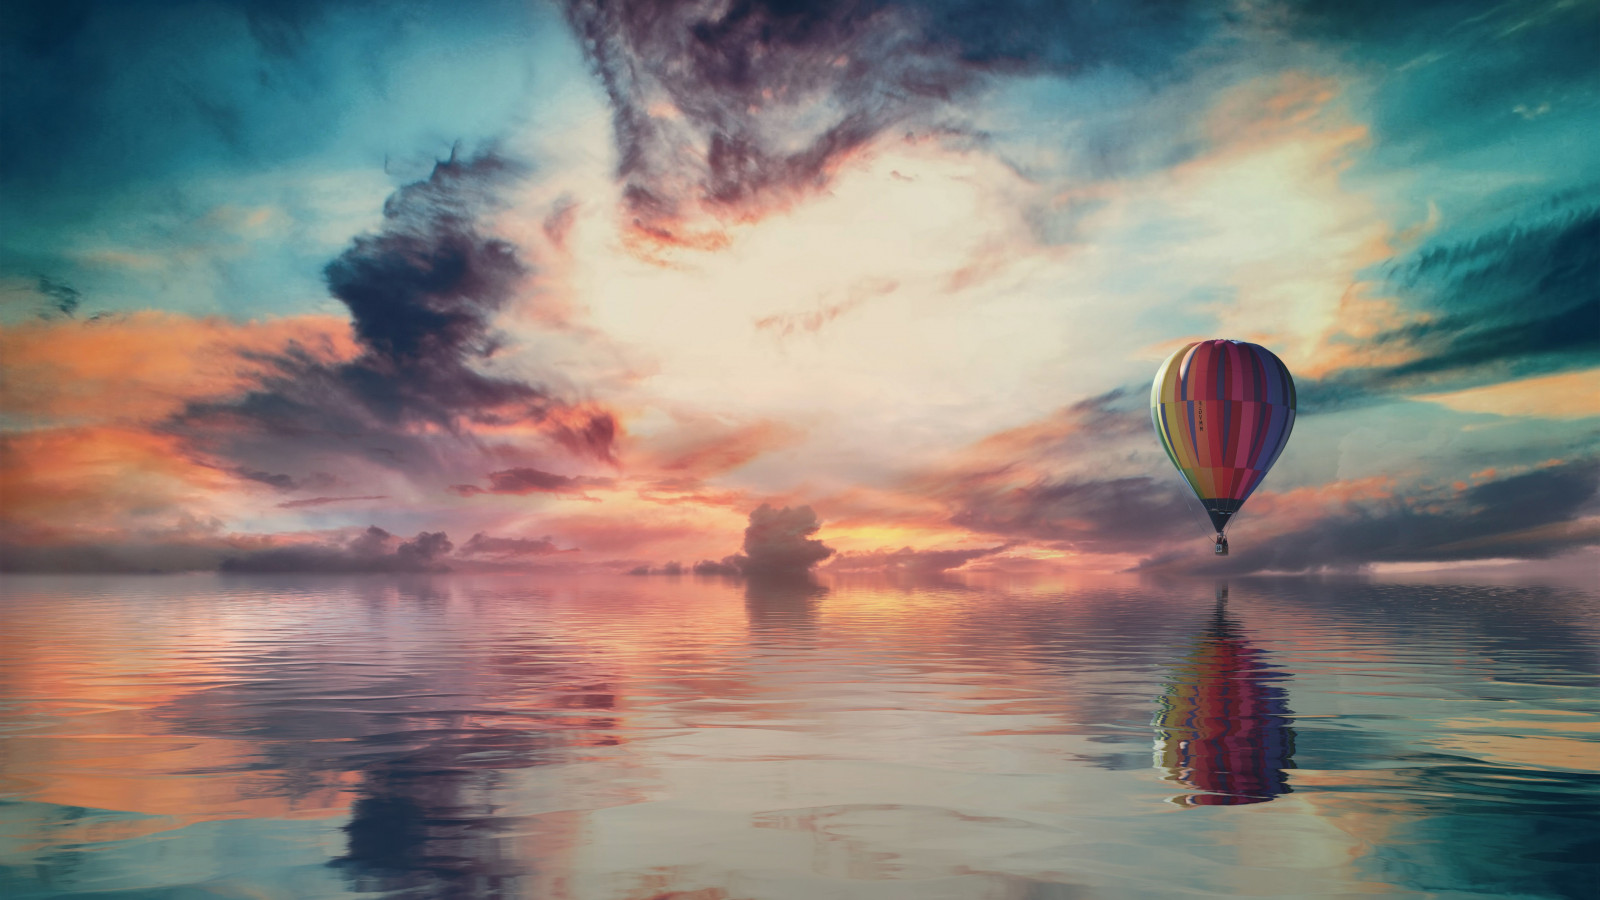 Fantasy travel with the hot air balloon wallpaper 1600x900